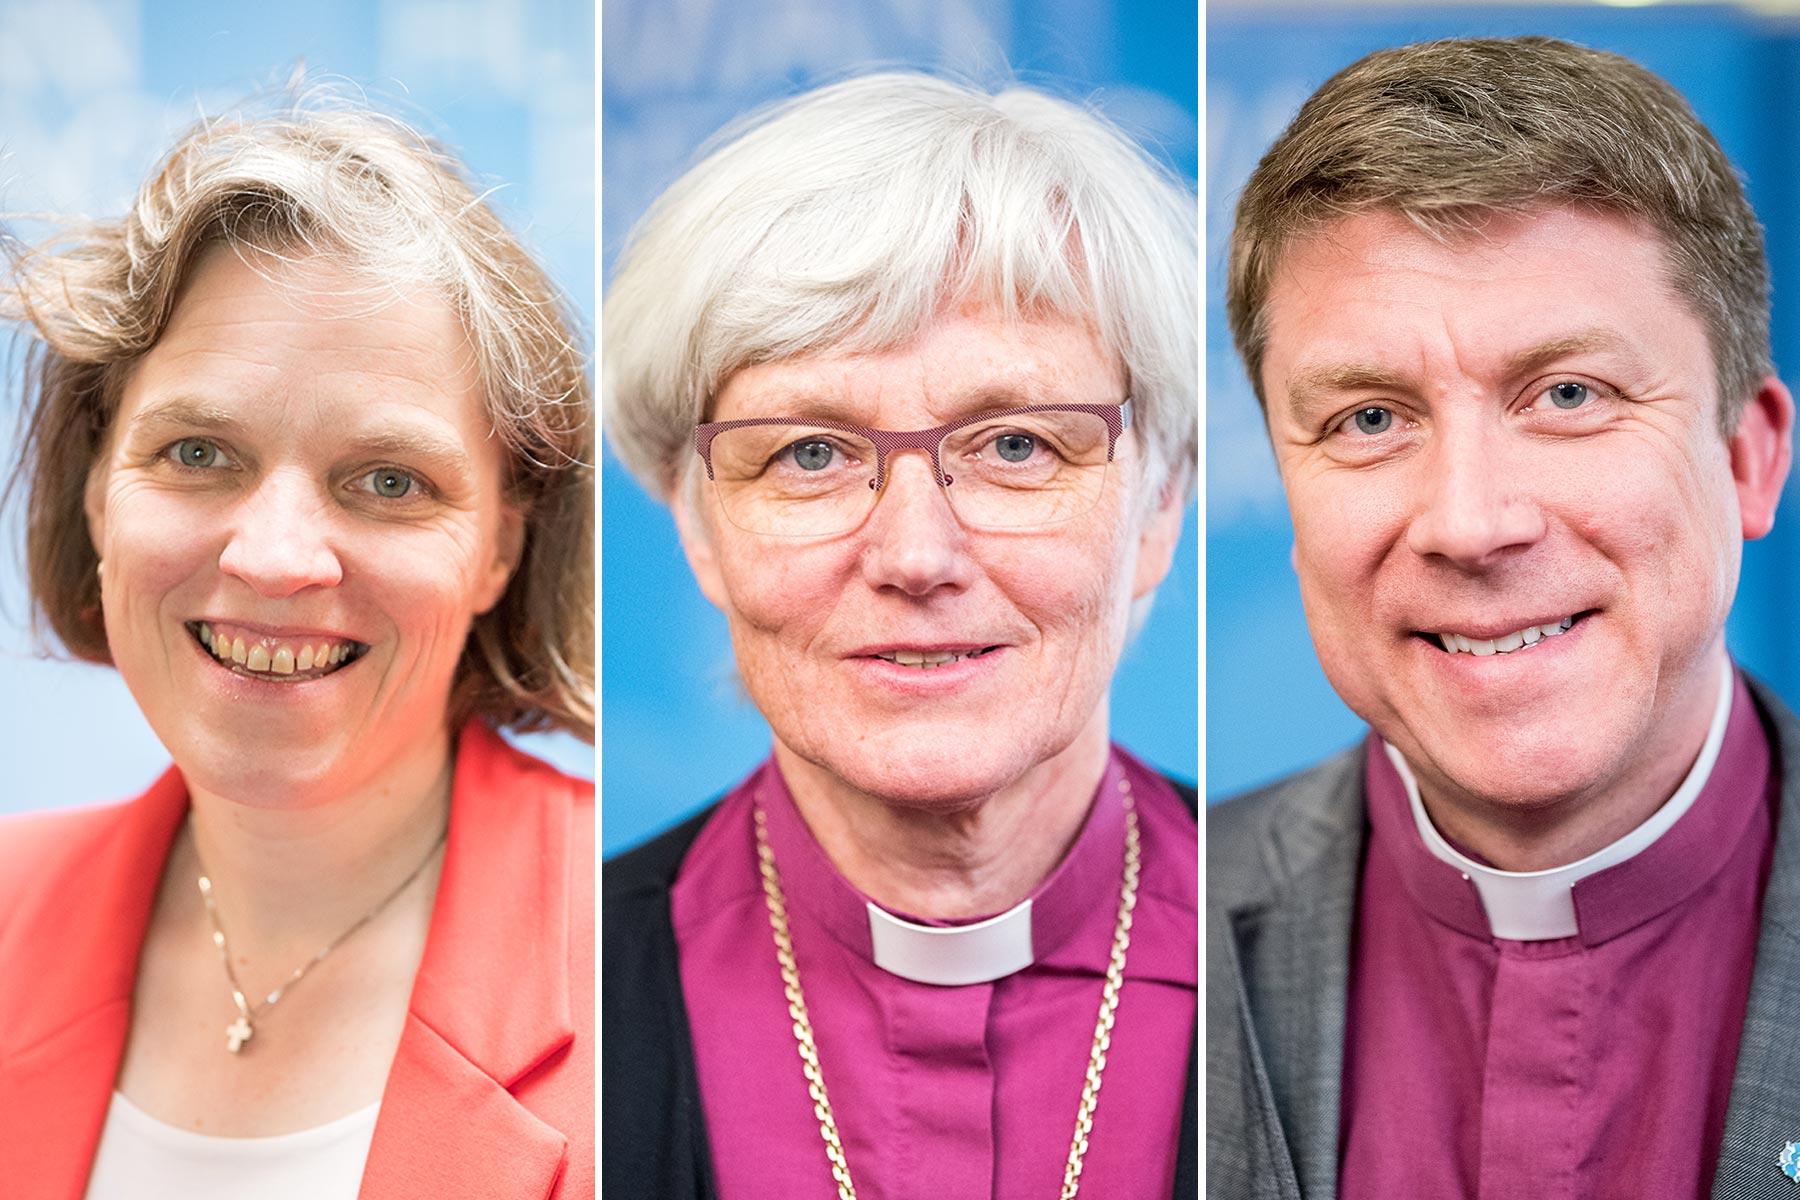 The vice-presidents of the European regions: PrÃ¶pstin Astrid Kleist for Central and Western Europe, Archbishop Antje JackelÃ©n for the Nordic Countries and Archbishop Urmas Viilma for Central and Eastern Europe. Photo: LWF/Albin Hillert